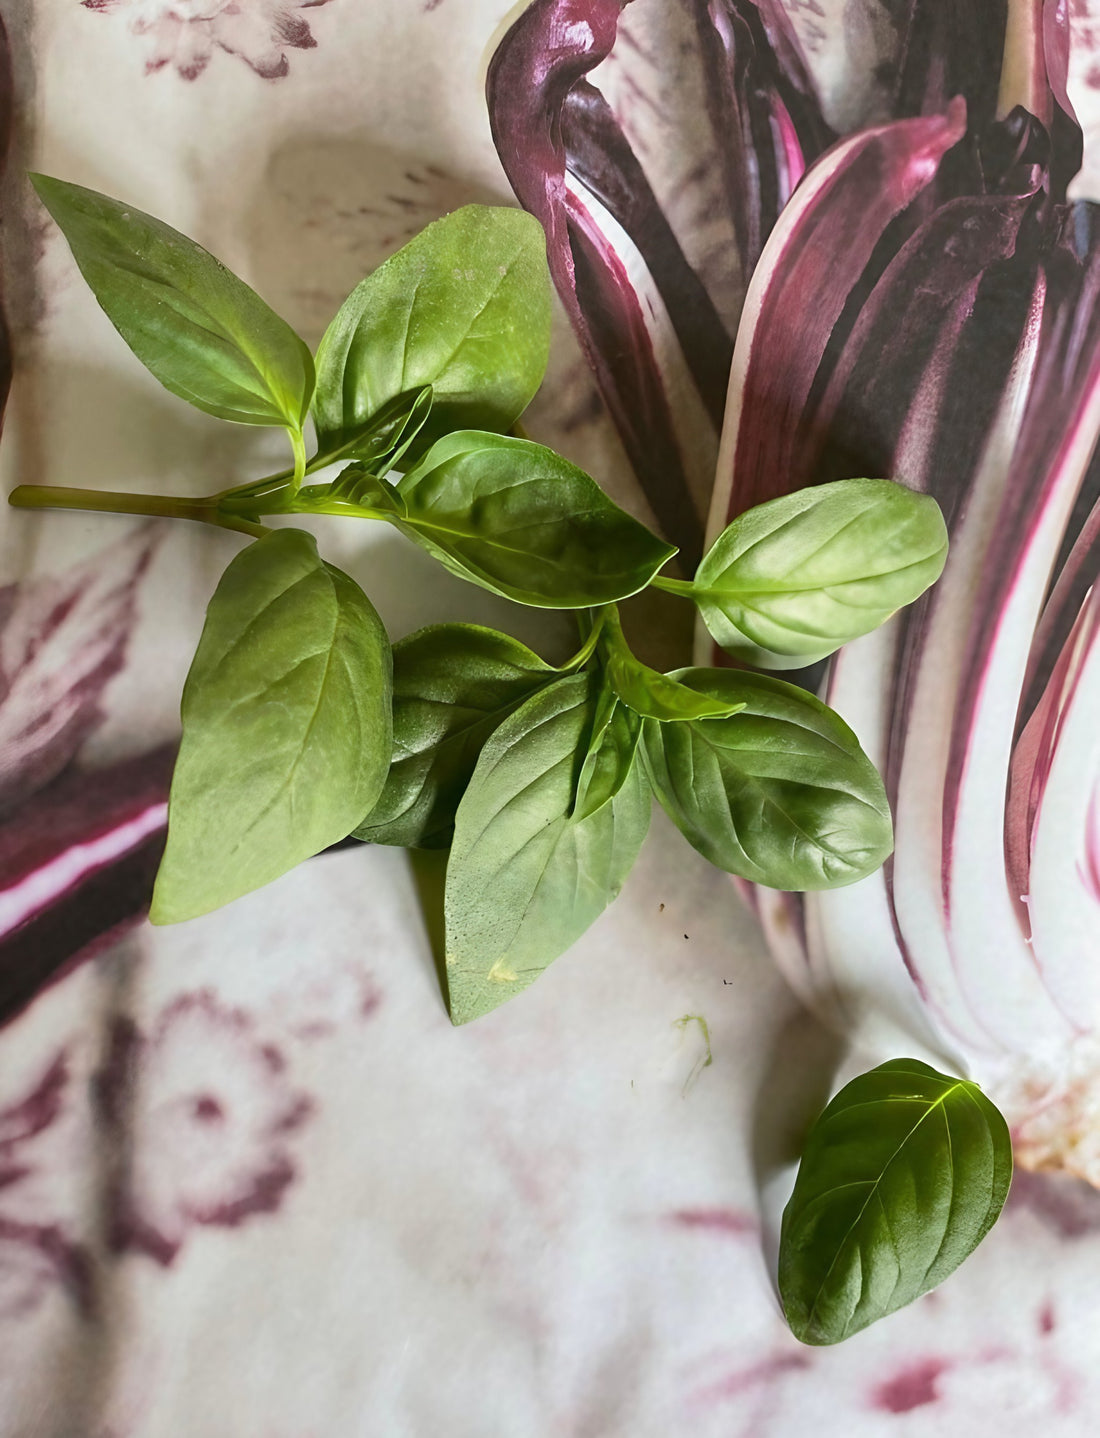 Thai Siam Queen basil plant with vibrant green leaves on a wooden table next to a kitchen knife